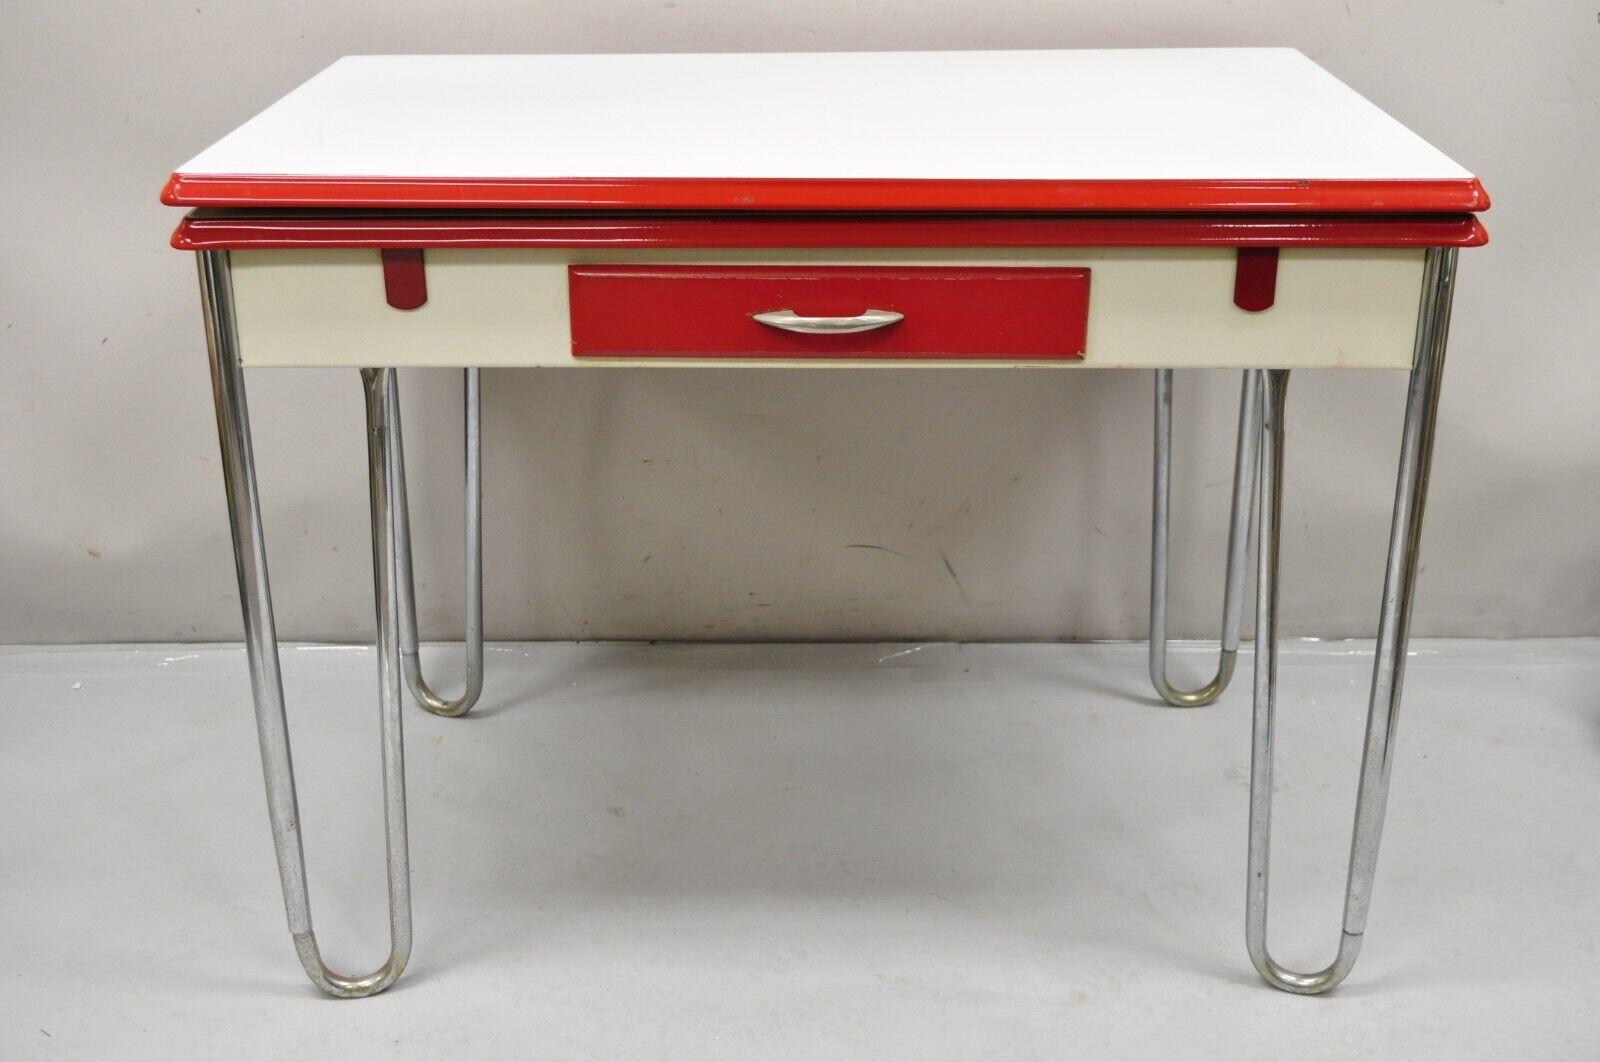 Antique Art Deco Red and White Porcelain Enamel 40” Extension Kitchen Table. Item features pullout extension leaves, one drawer, tubular legs, very nice antique item. Circa Early 20th Century. Measurements: 30.5